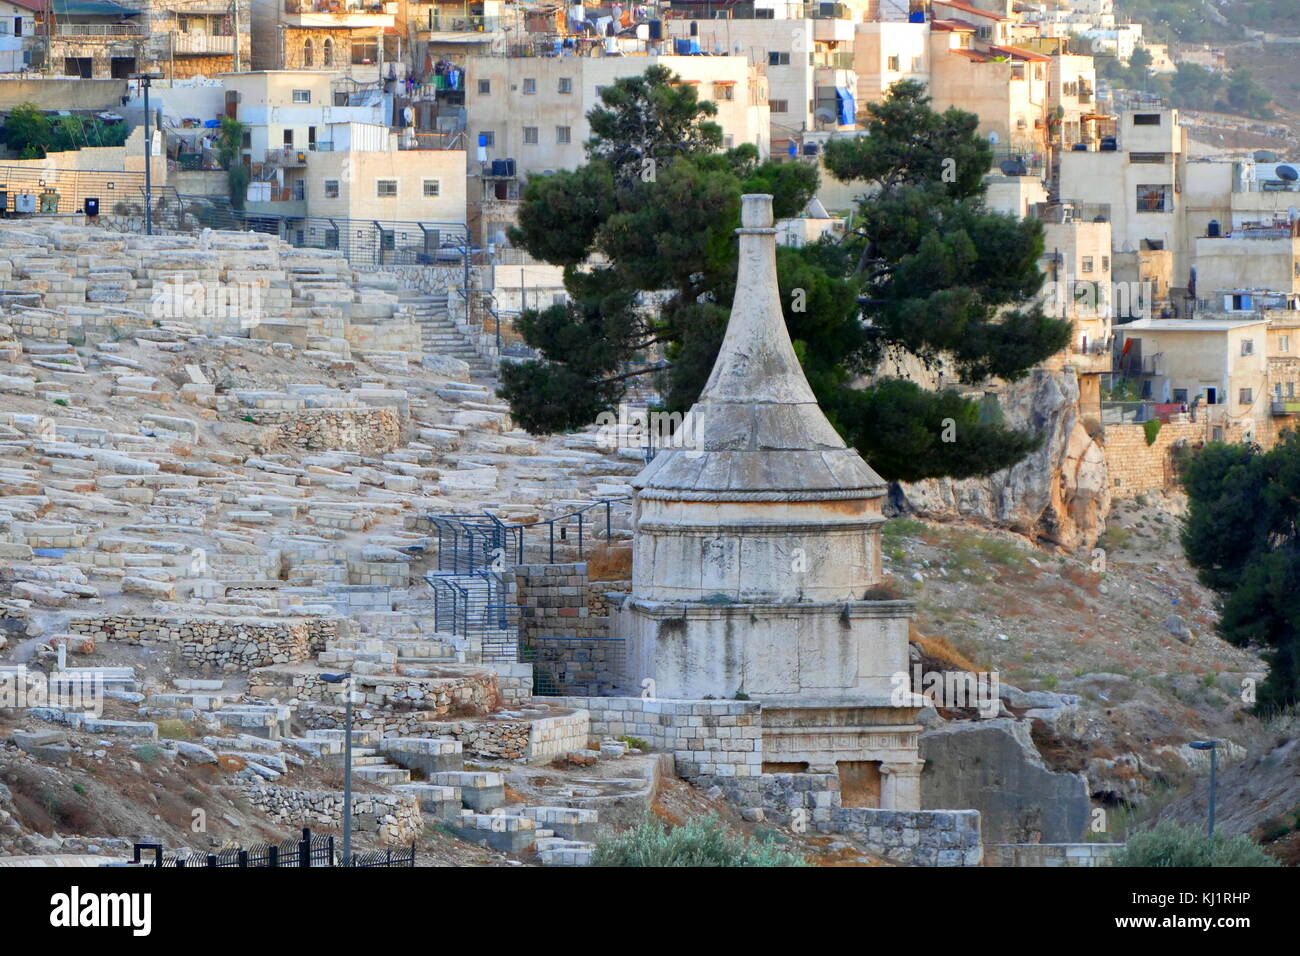 Tomb of Absalom, an ancient monumental rock-cut tomb in the Kidron Valley in Jerusalem. Although traditionally ascribed to Absalom, the rebellious son of King David of Israel (circa 1000 BCE), recent scholarship has attributed it to the 1st century CE. Stock Photo